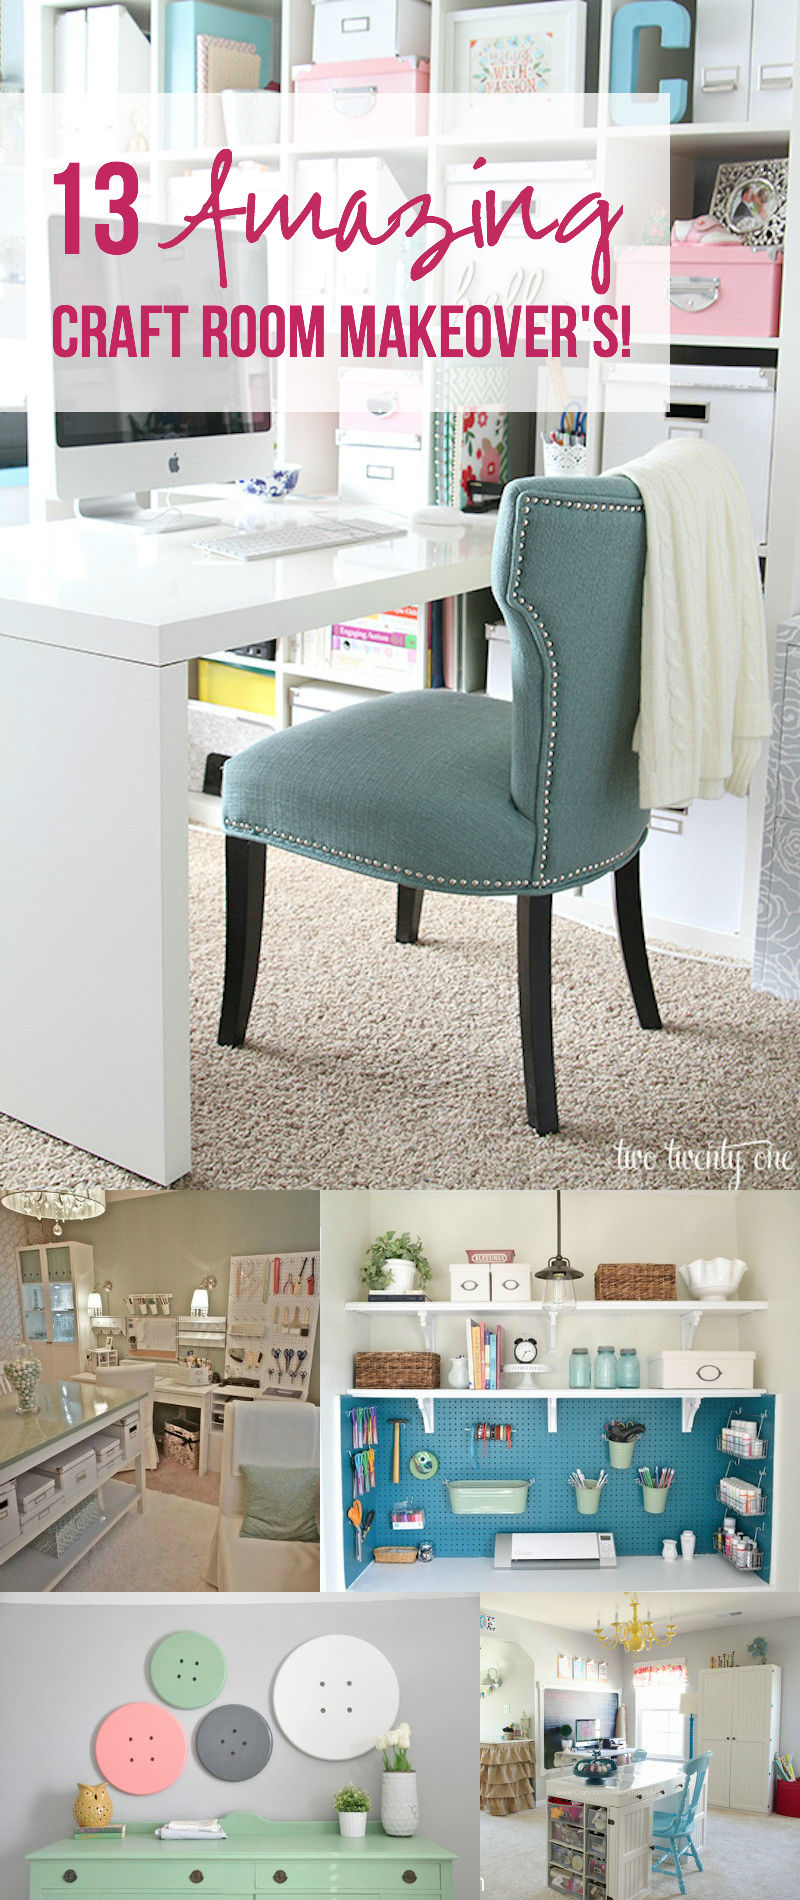 Craft Room Ideas: Makeover Final Reveal (and it's amazing) ♥ Fleece Fun